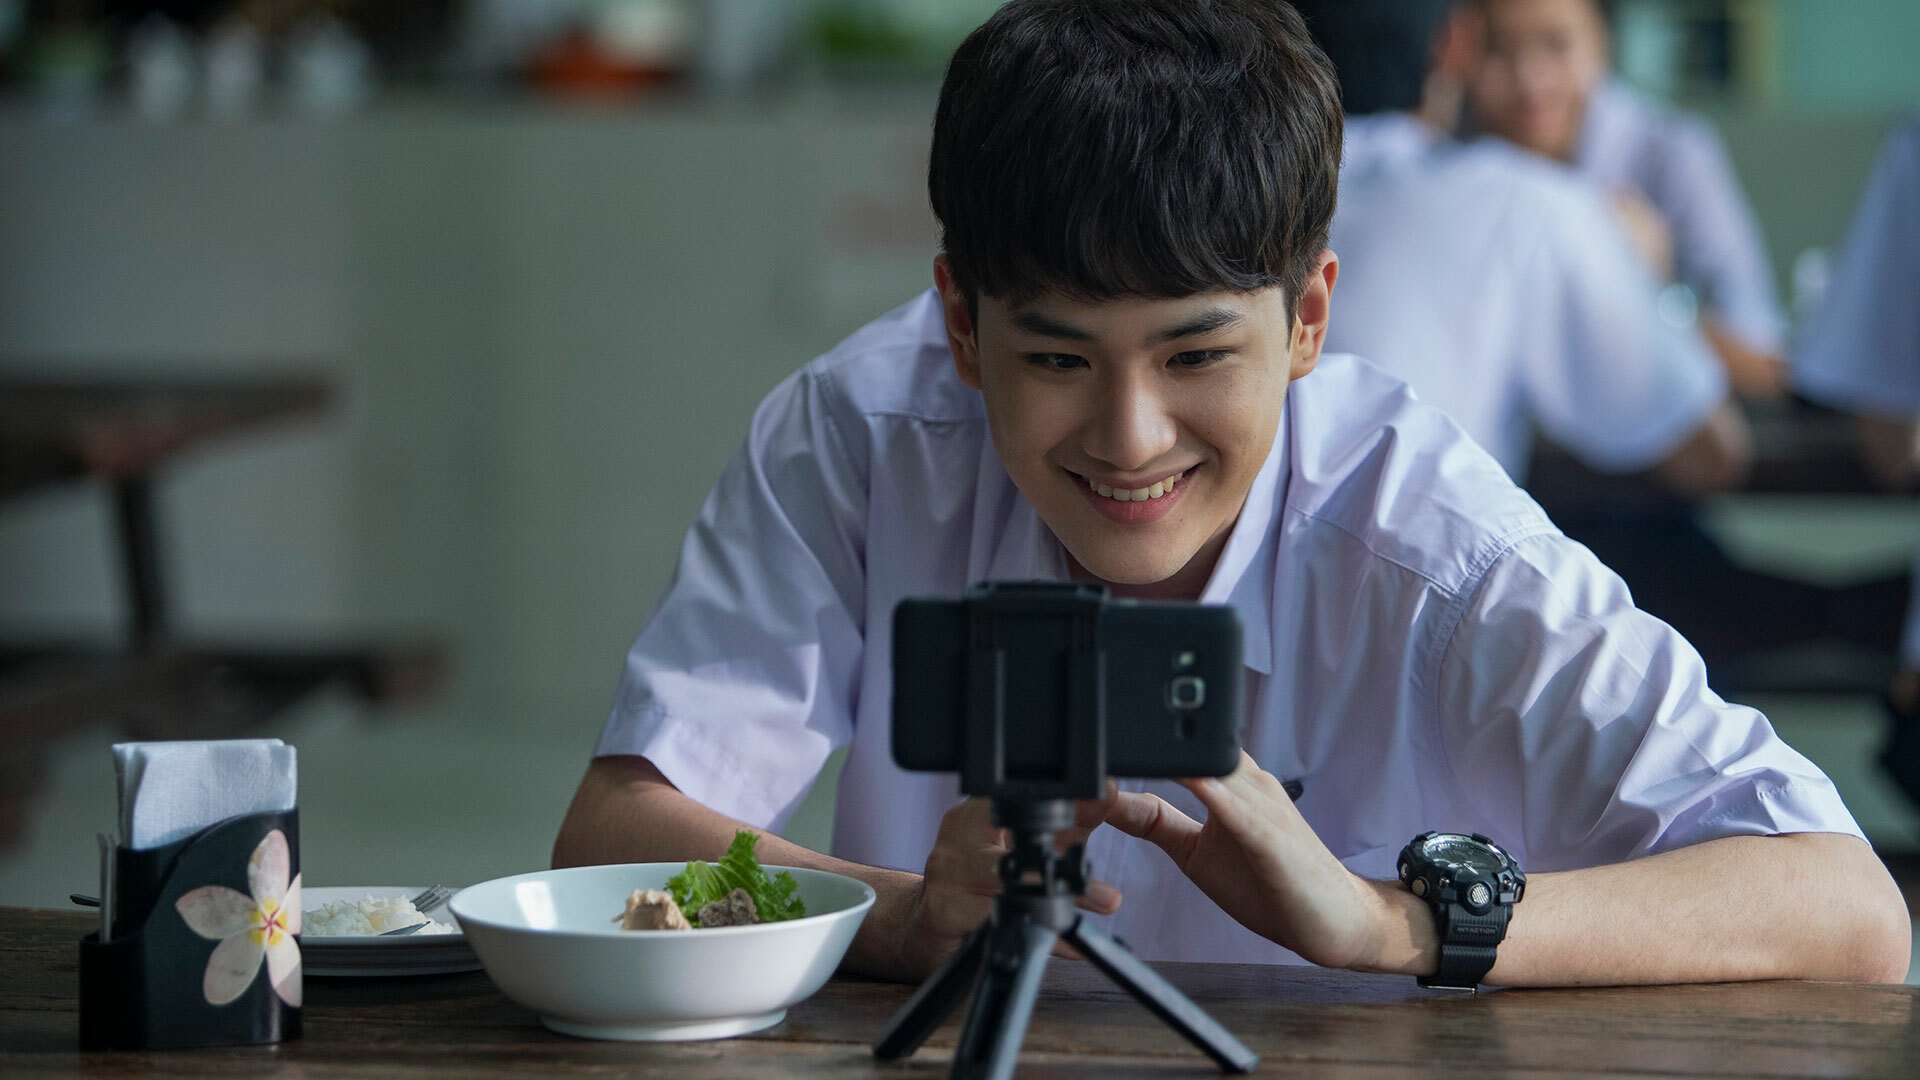 A boy sitting in a lunch cafeteria smiles at his smartphone, which rests on a tripod.